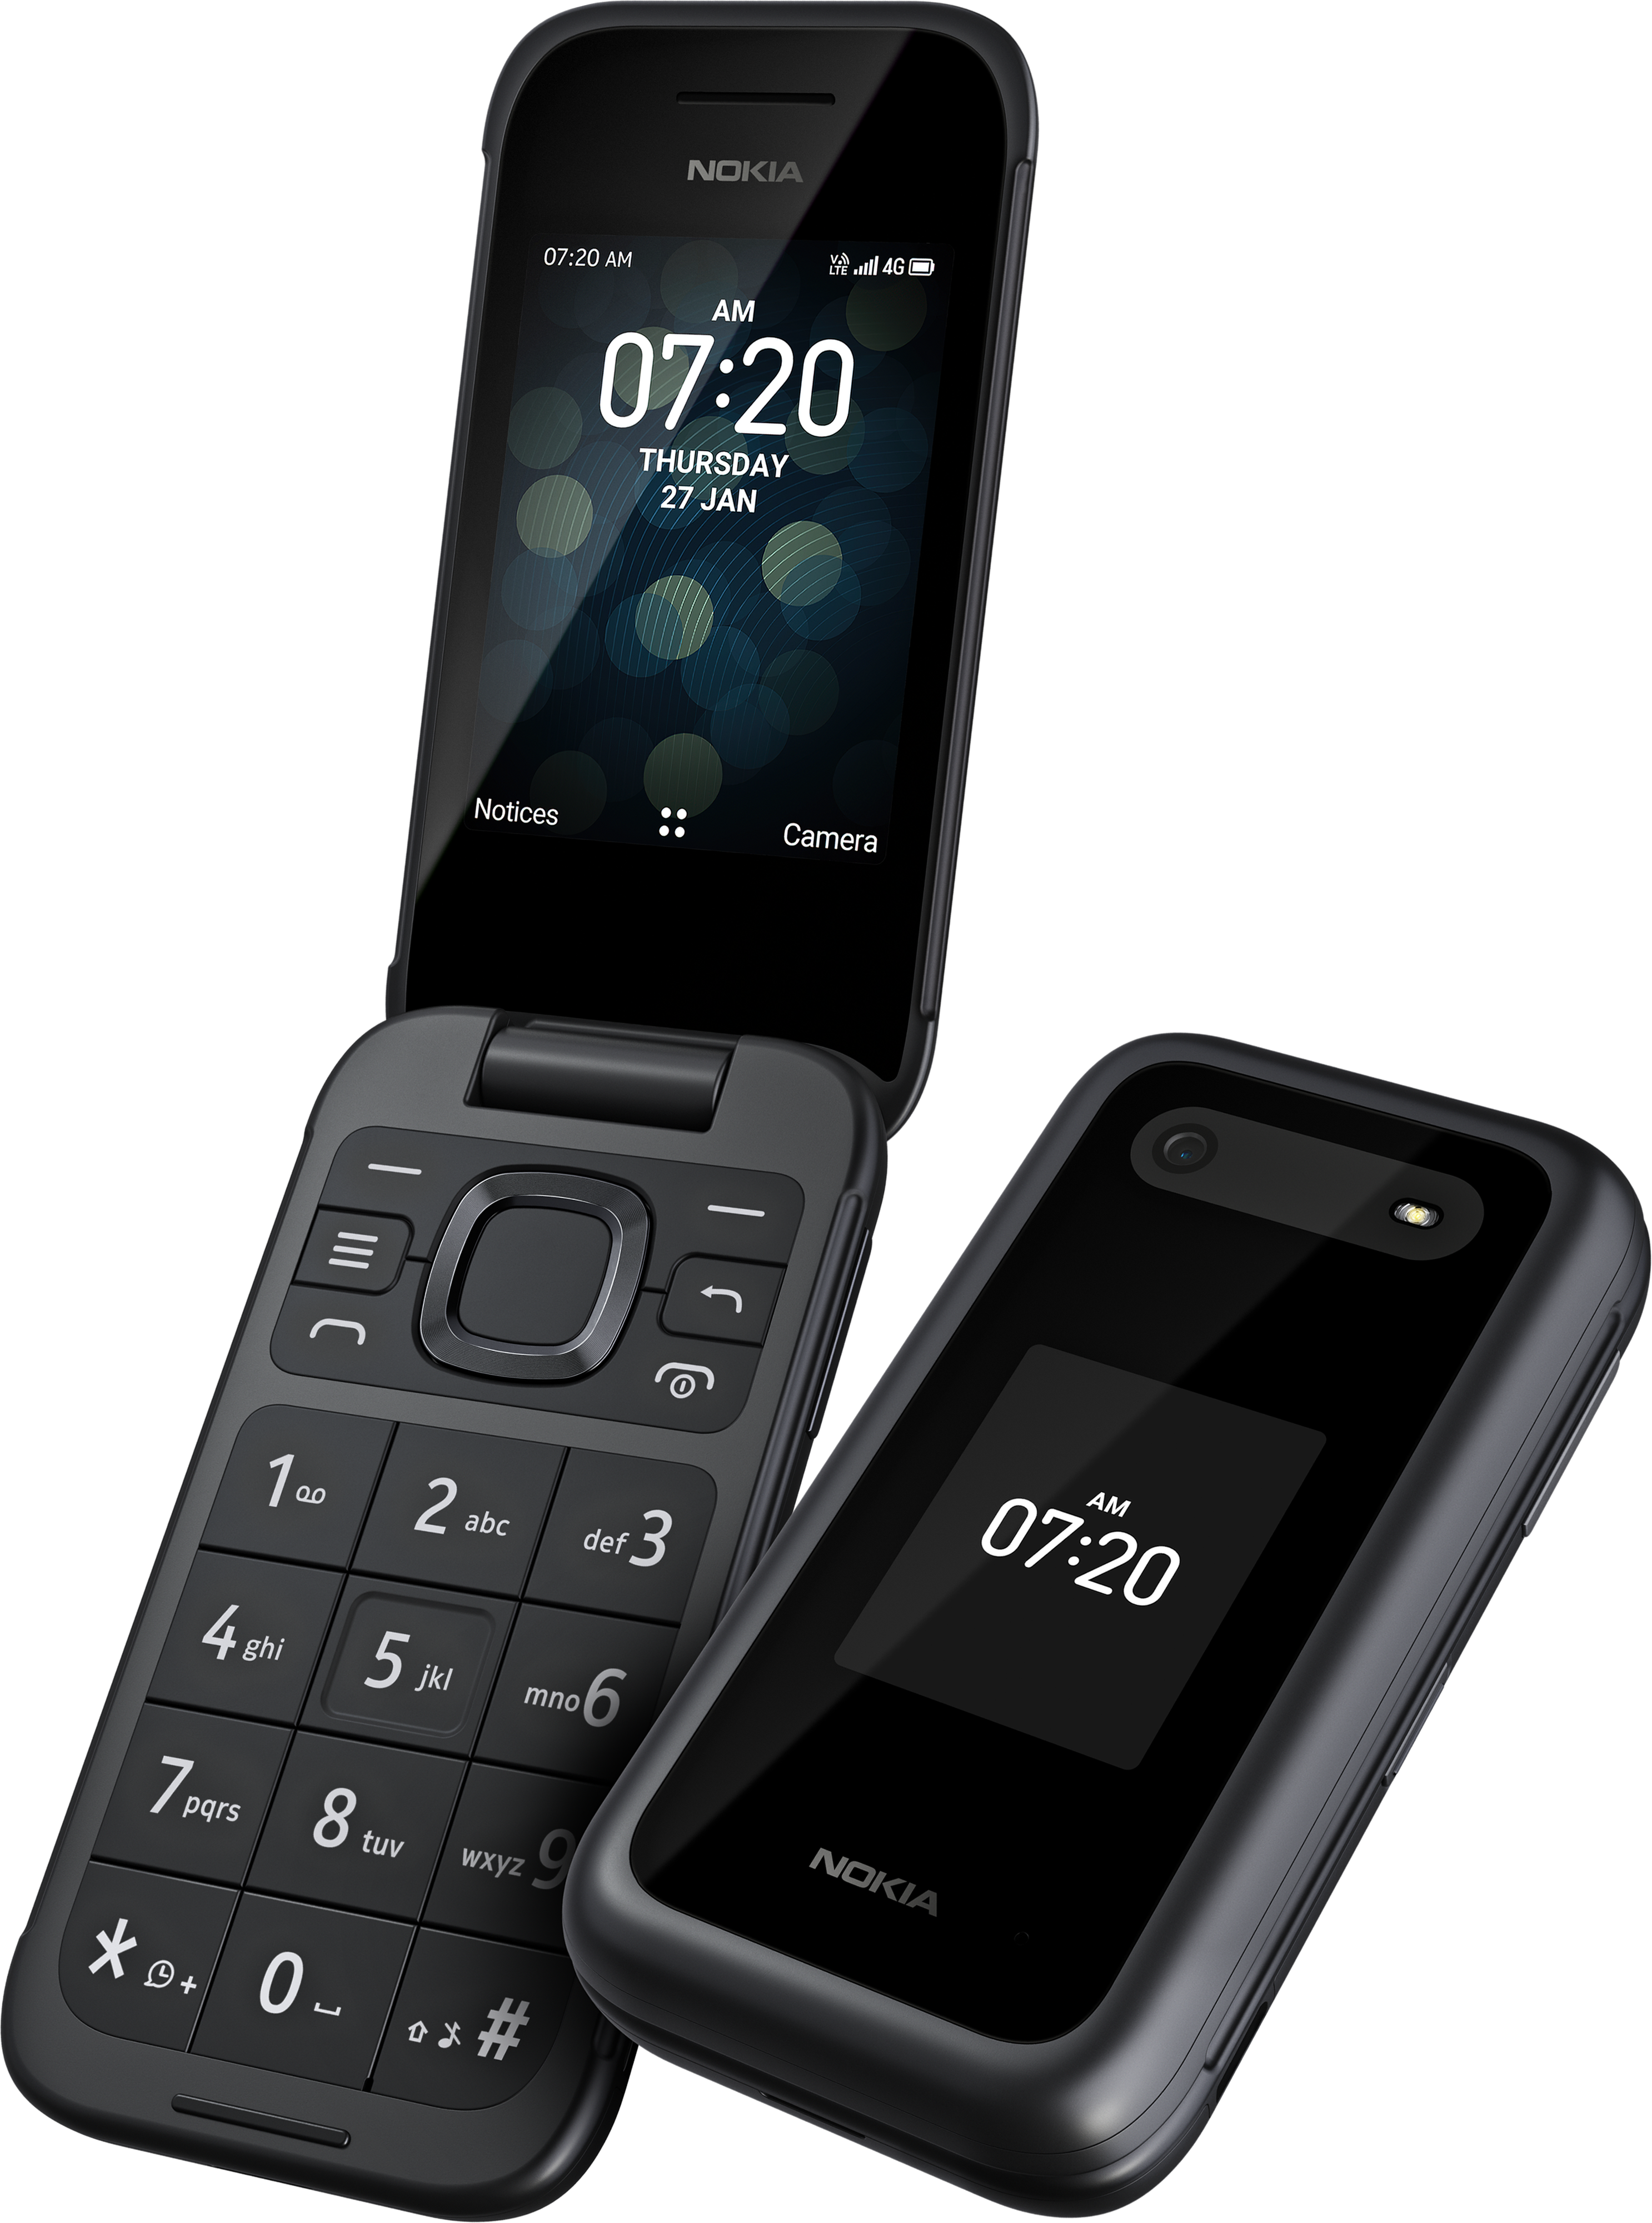 Tracfone Nokia 2760 Flip 4GB Prepaid [Locked to Tracfone] Black  TFNKN139DC3PWP - Best Buy